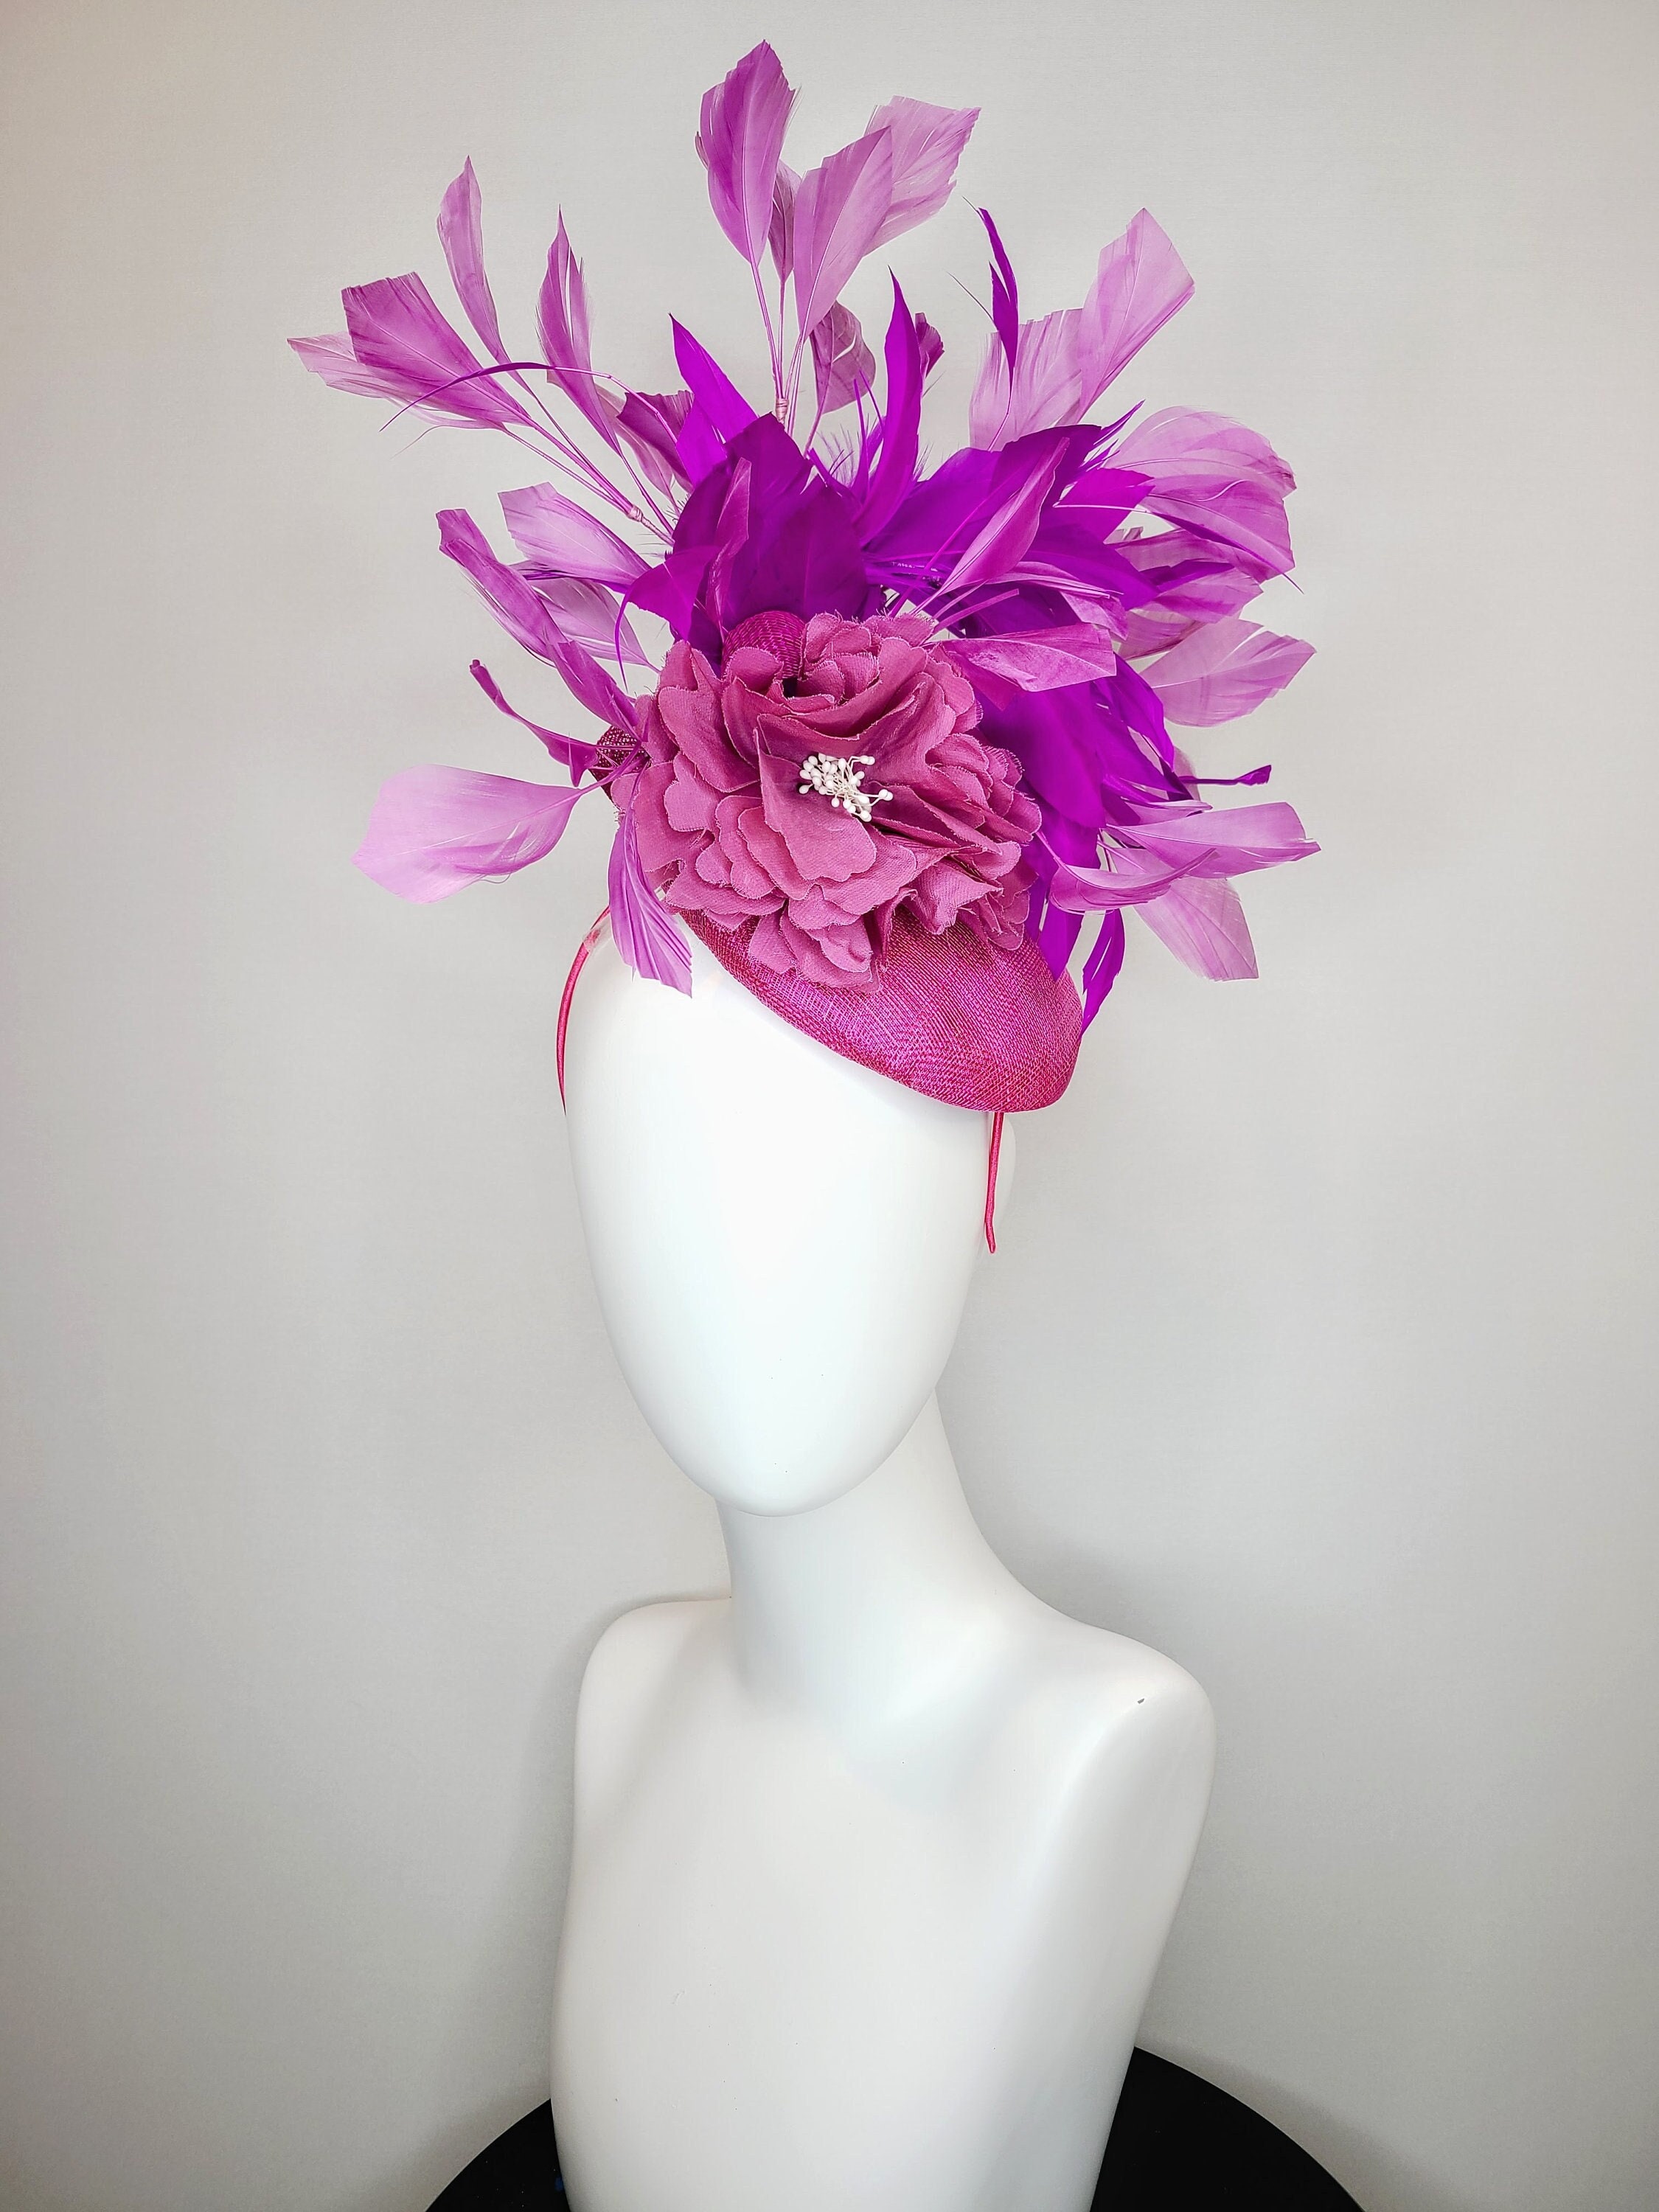 kentucky derby hat fascinator purple violet metallic flower with matching lavender sparkle leaves and lavender fuchsia pink feathers